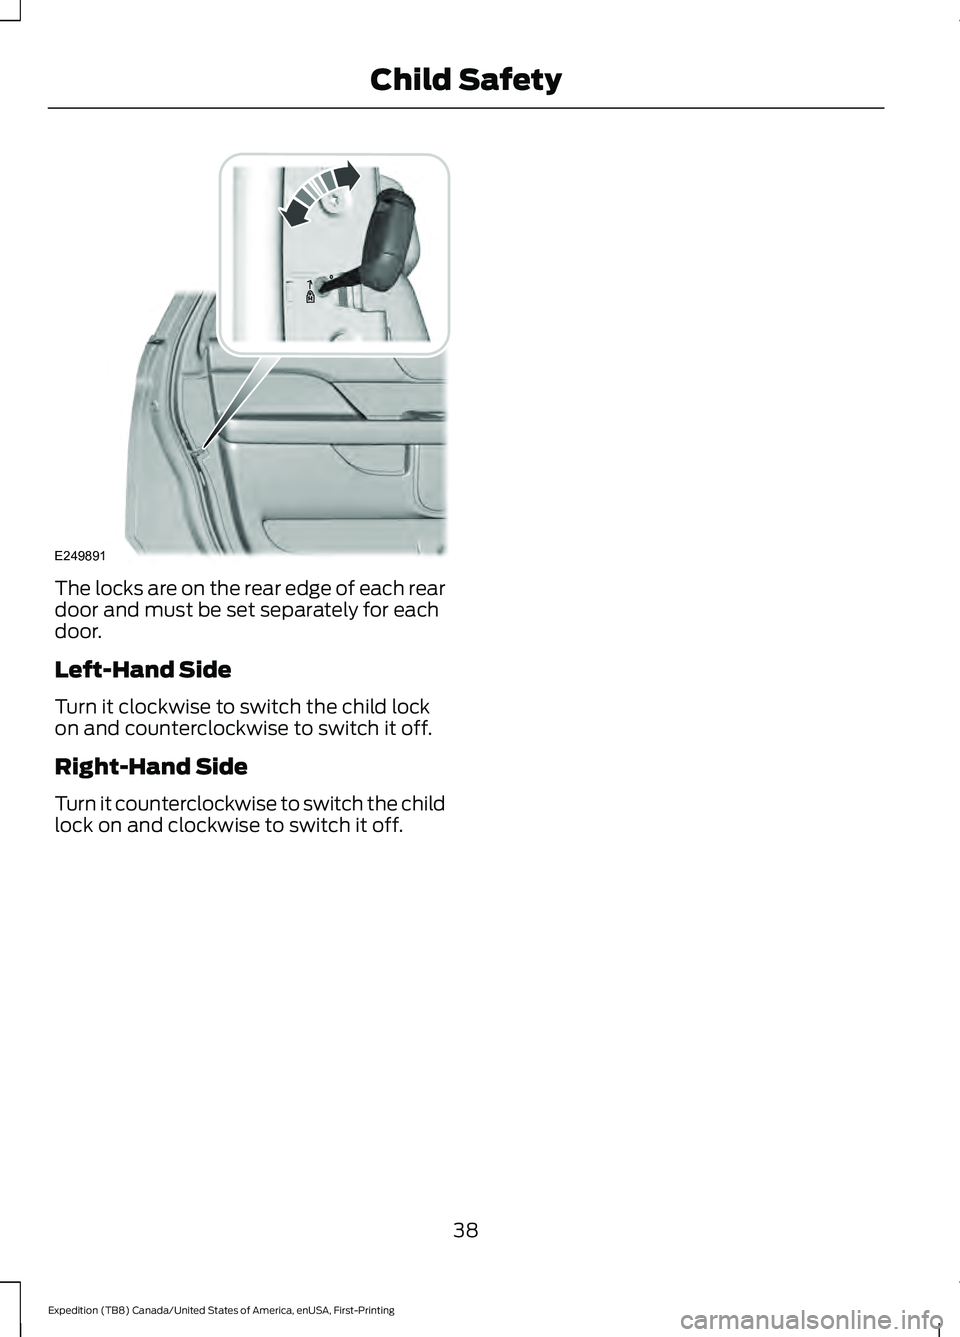 FORD EXPEDITION 2021 Service Manual The locks are on the rear edge of each rear
door and must be set separately for each
door.
Left-Hand Side
Turn it clockwise to switch the child lock
on and counterclockwise to switch it off.
Right-Han